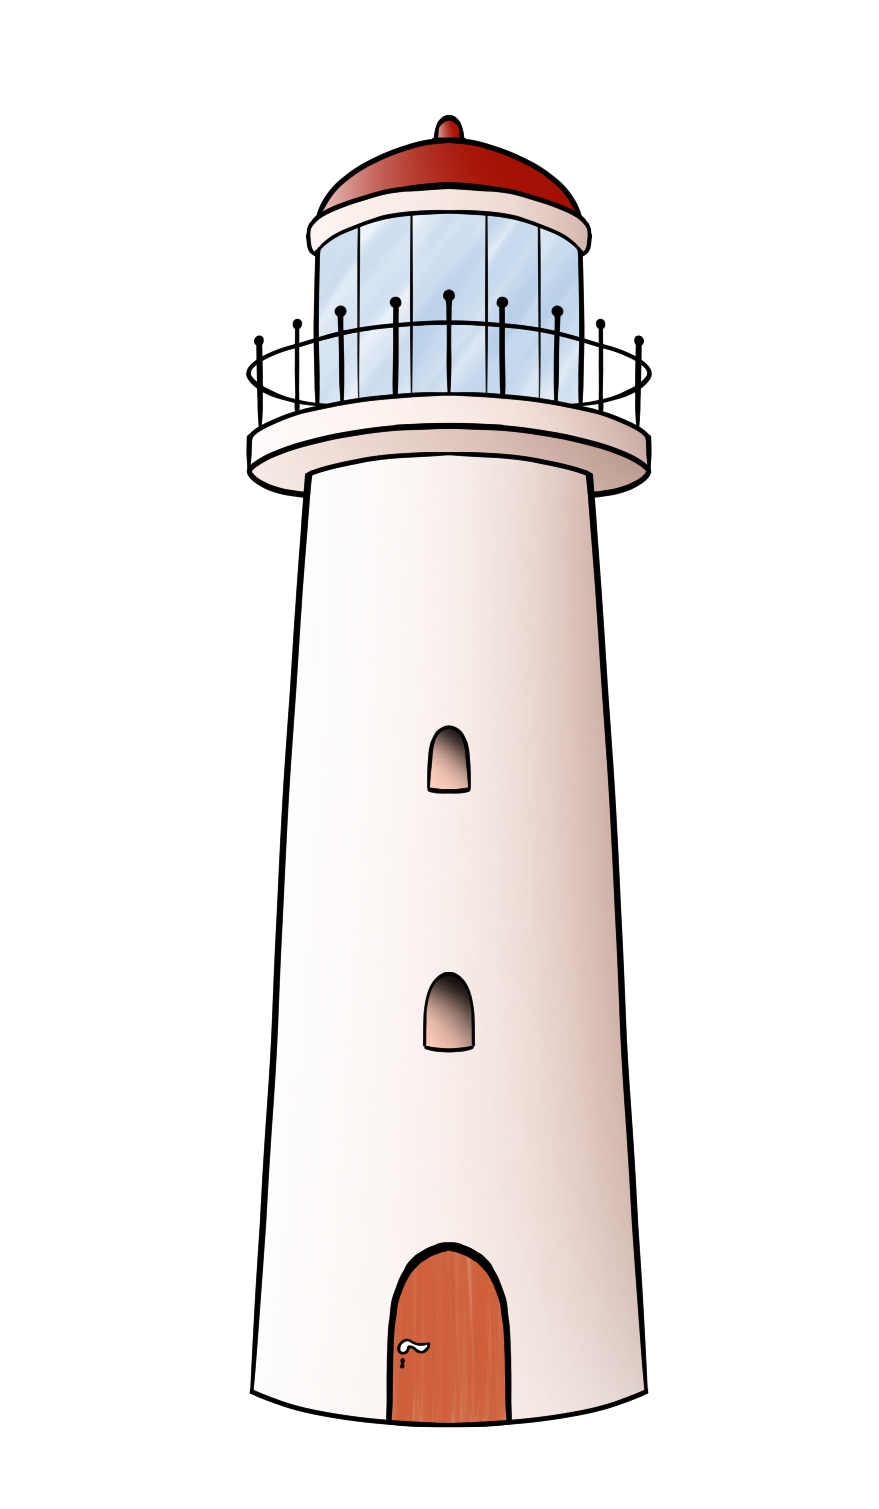 Free cartoon image: Lighthouse - Hundreds of royalty-free pictures on Daily  Doodle